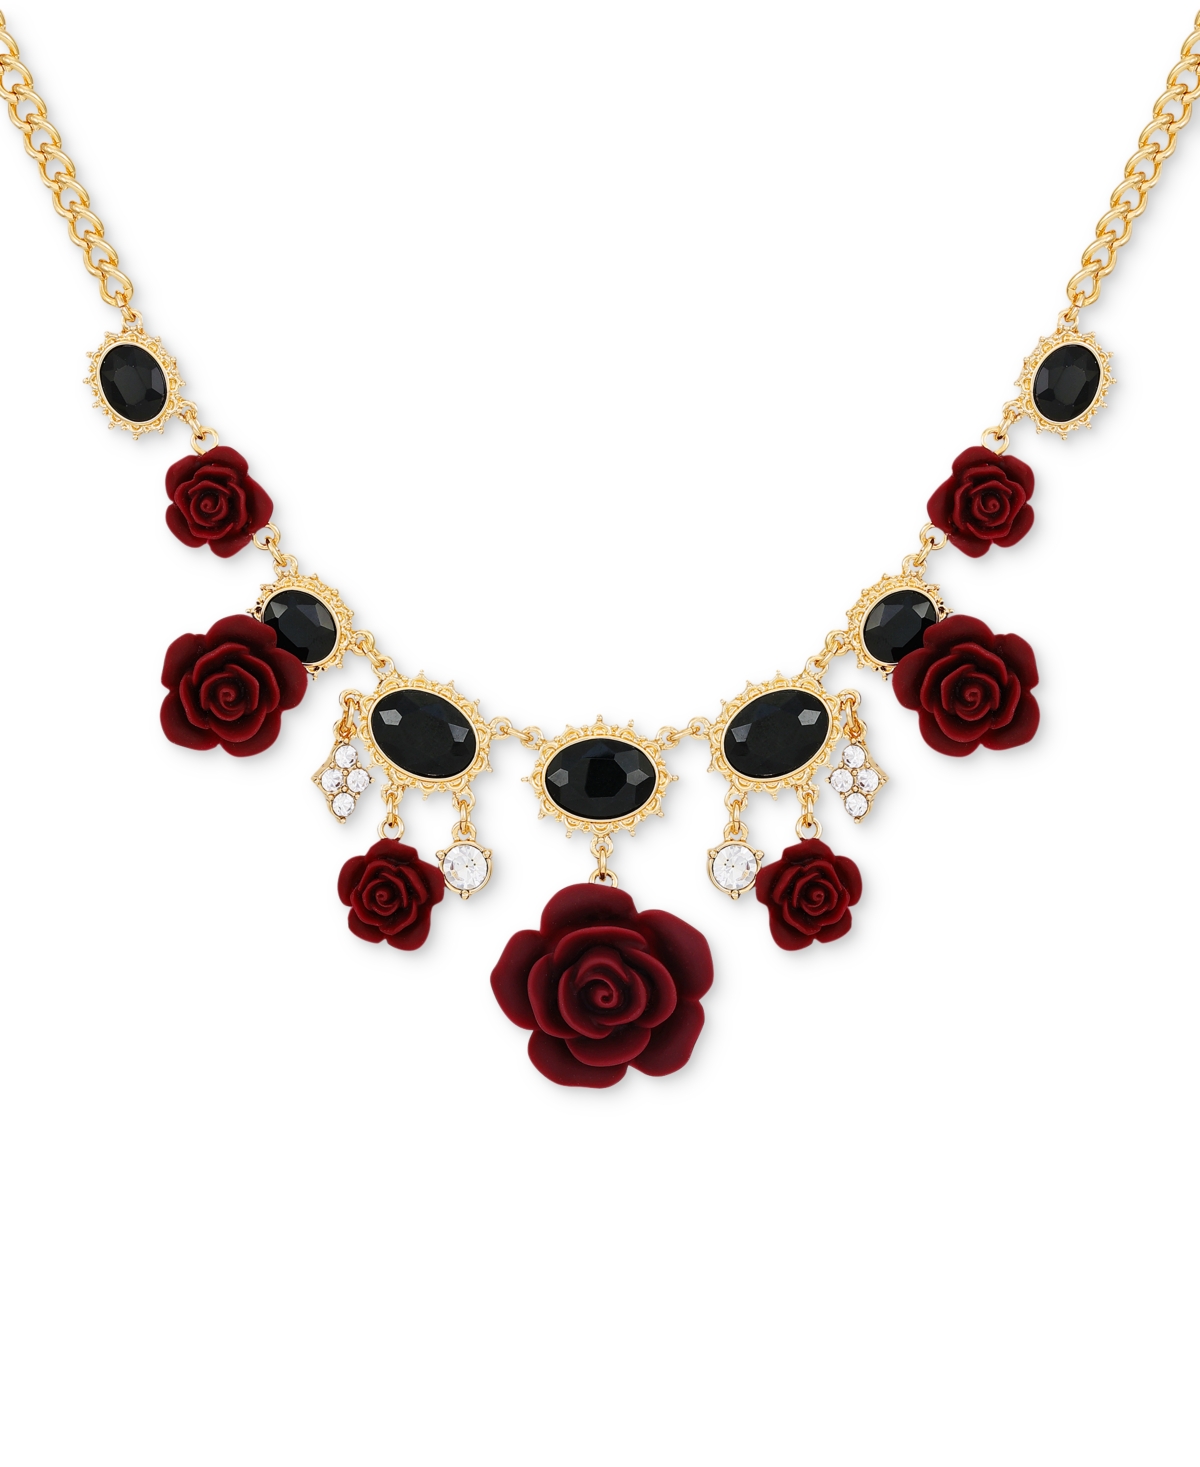 Guess Gold-tone Jet Stone & Burgundy Flower Statement Necklace, 18" + 2" Extender